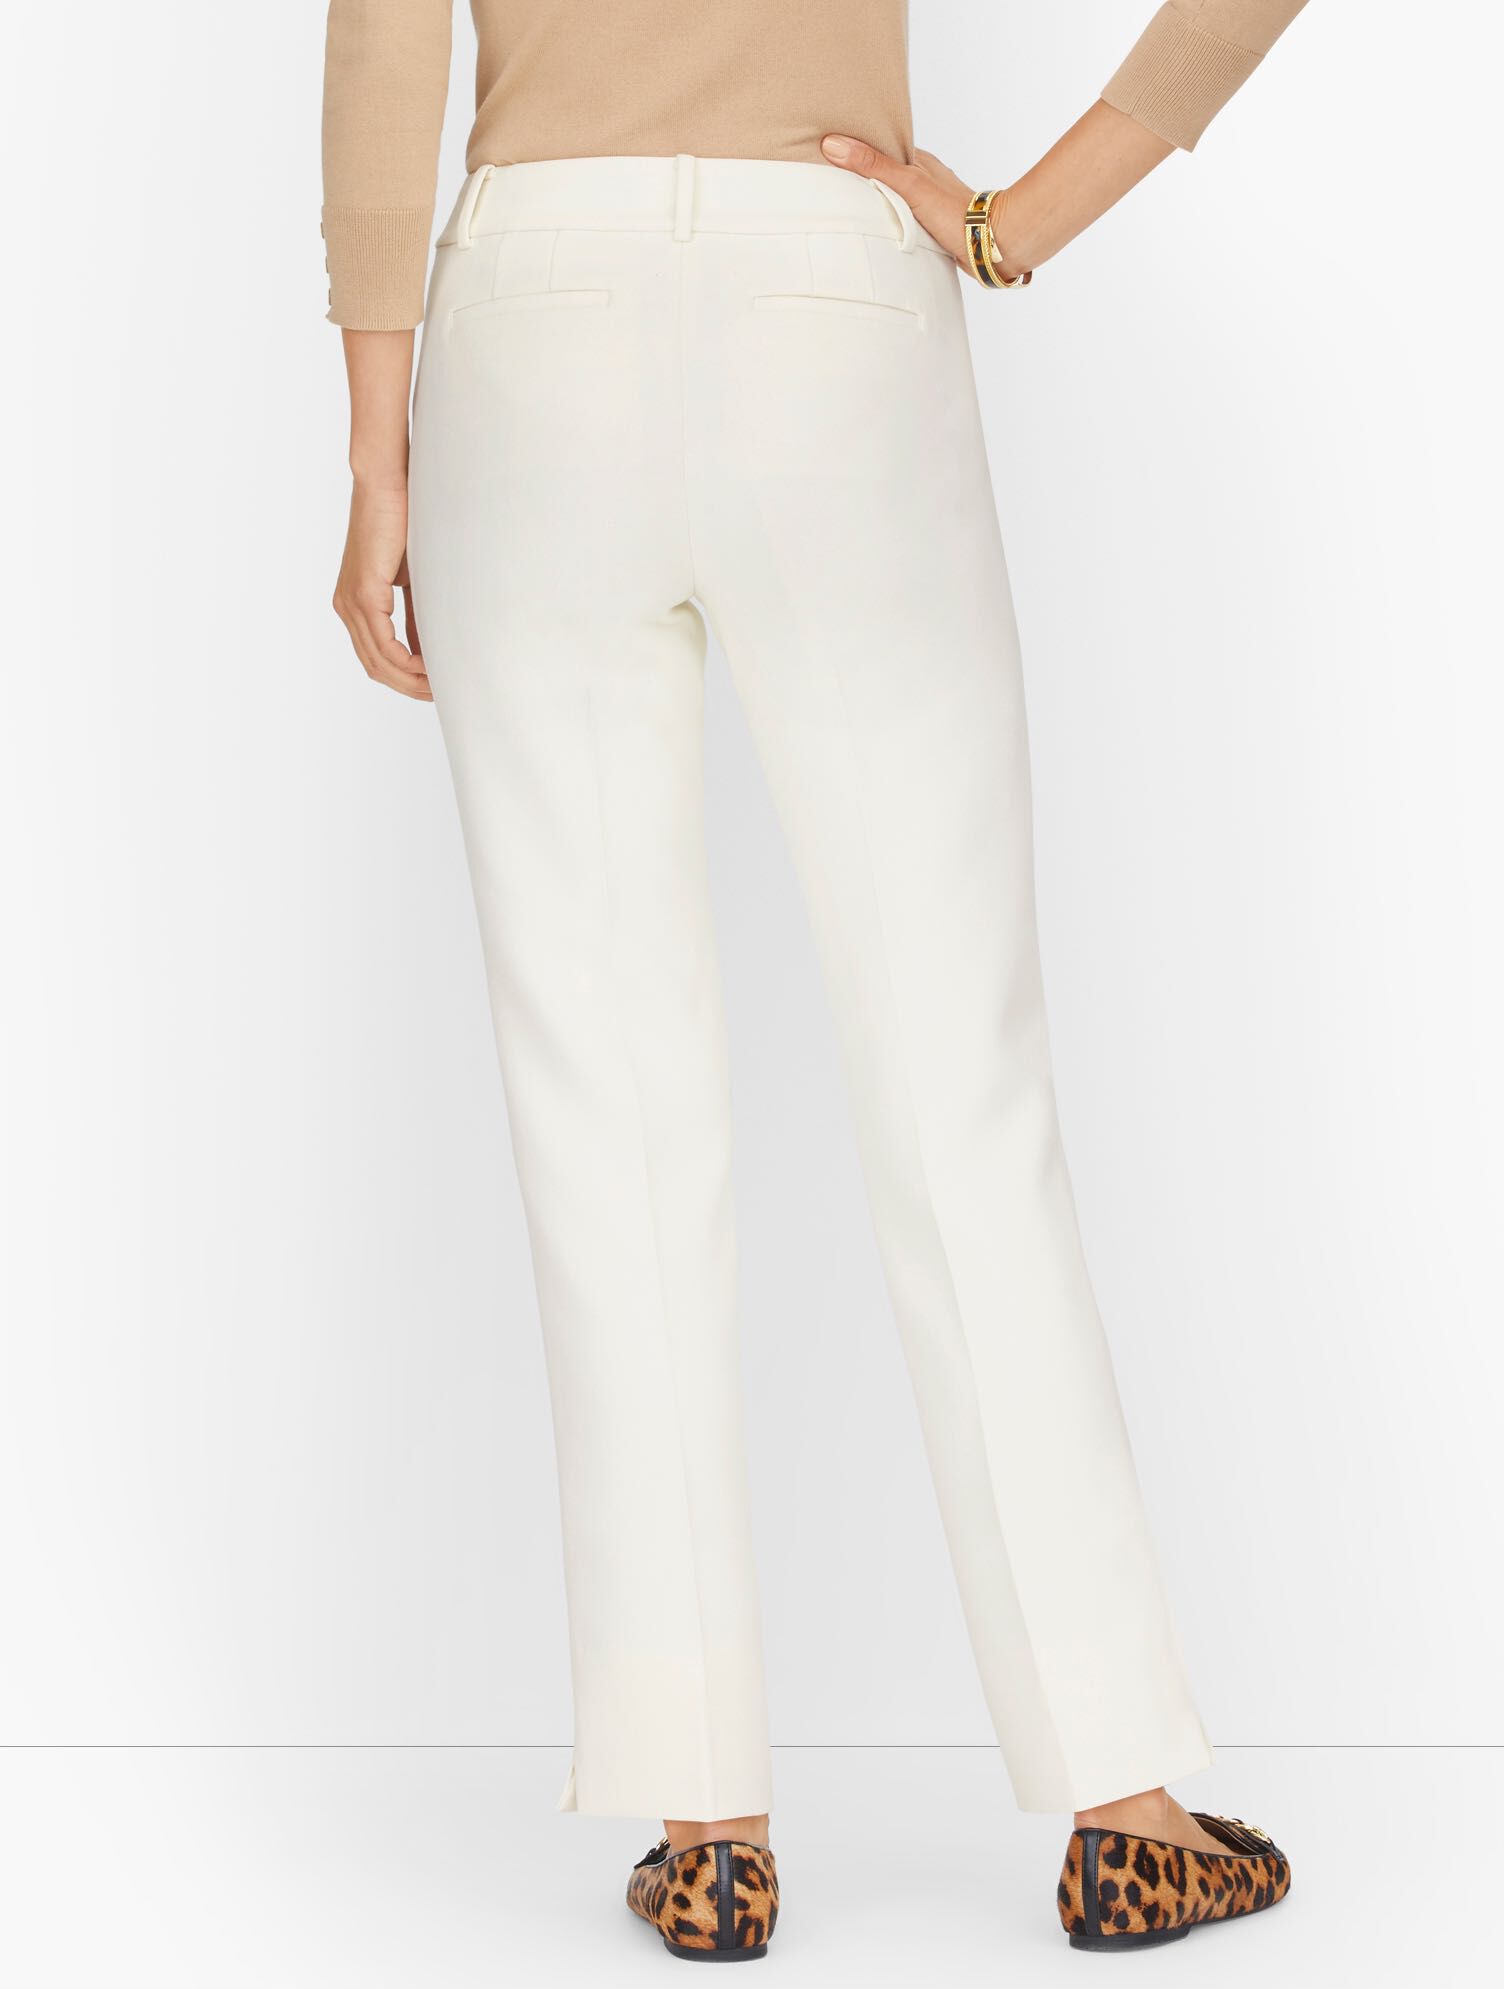 Talbots Hampshire Ankle Pants - Lined Ivory